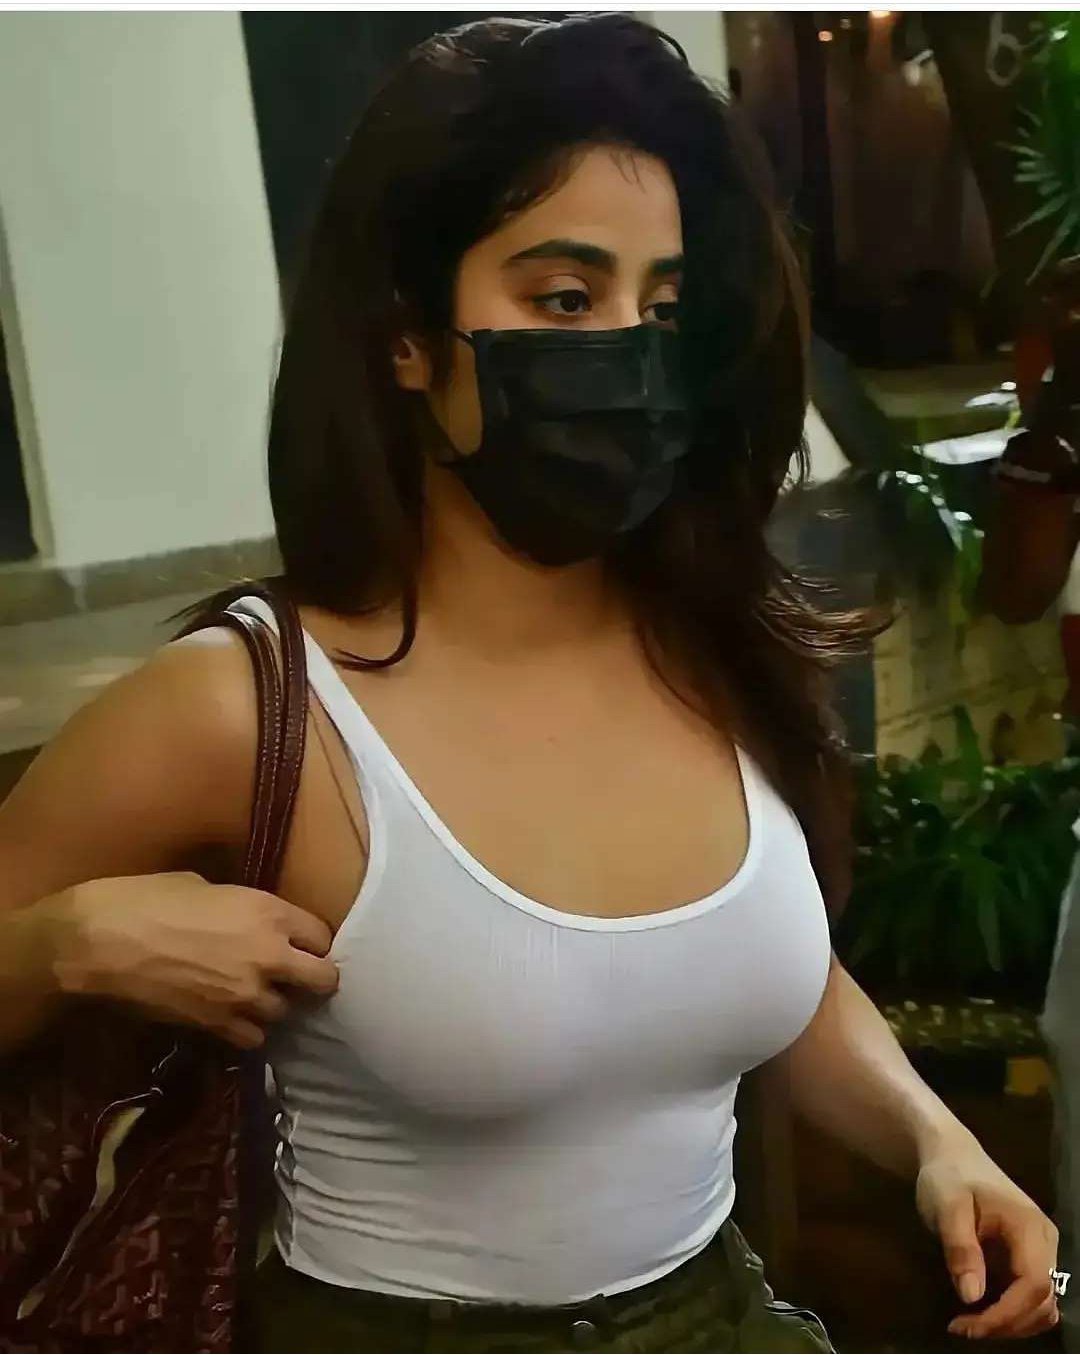 Janhvi Kapoor busty boobs with mask